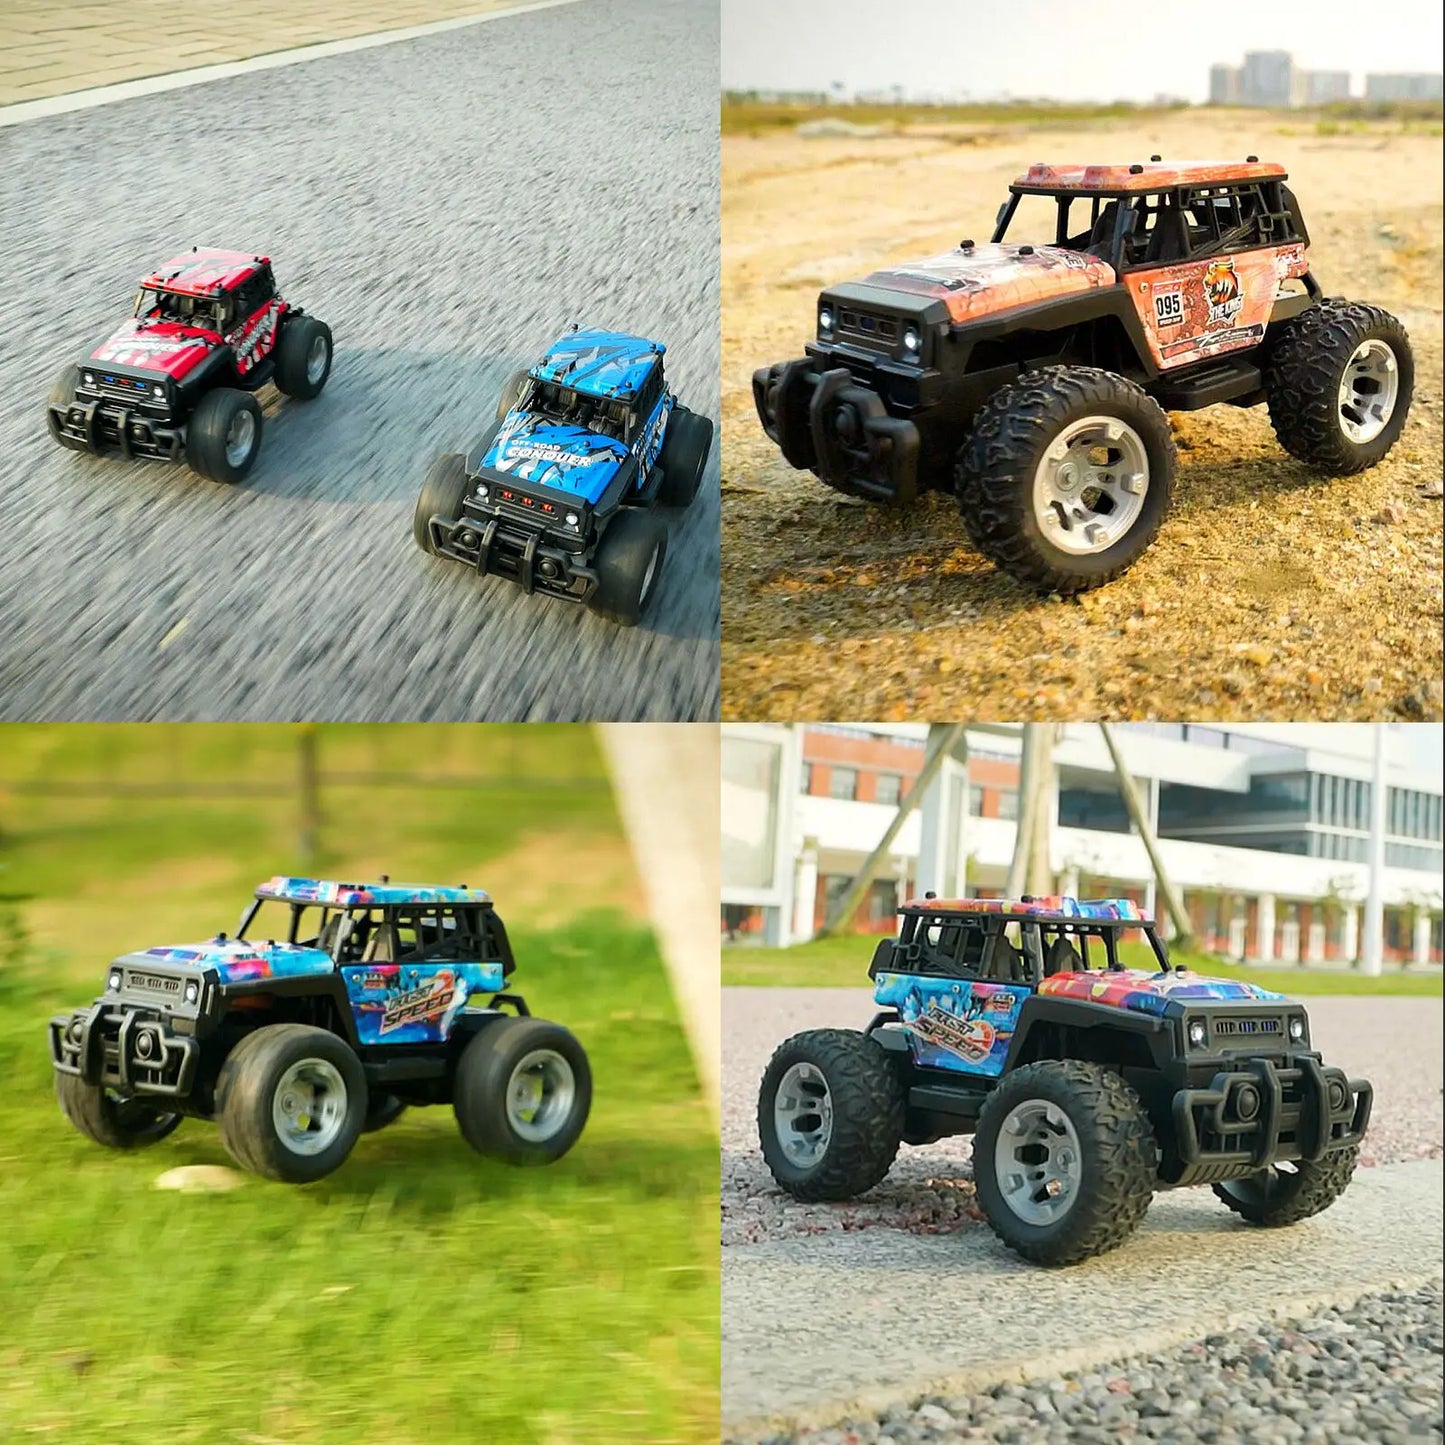 High Speed 1:20 Scale RC Car with LED Lights and Double Motors - Off-Road Monster Truck